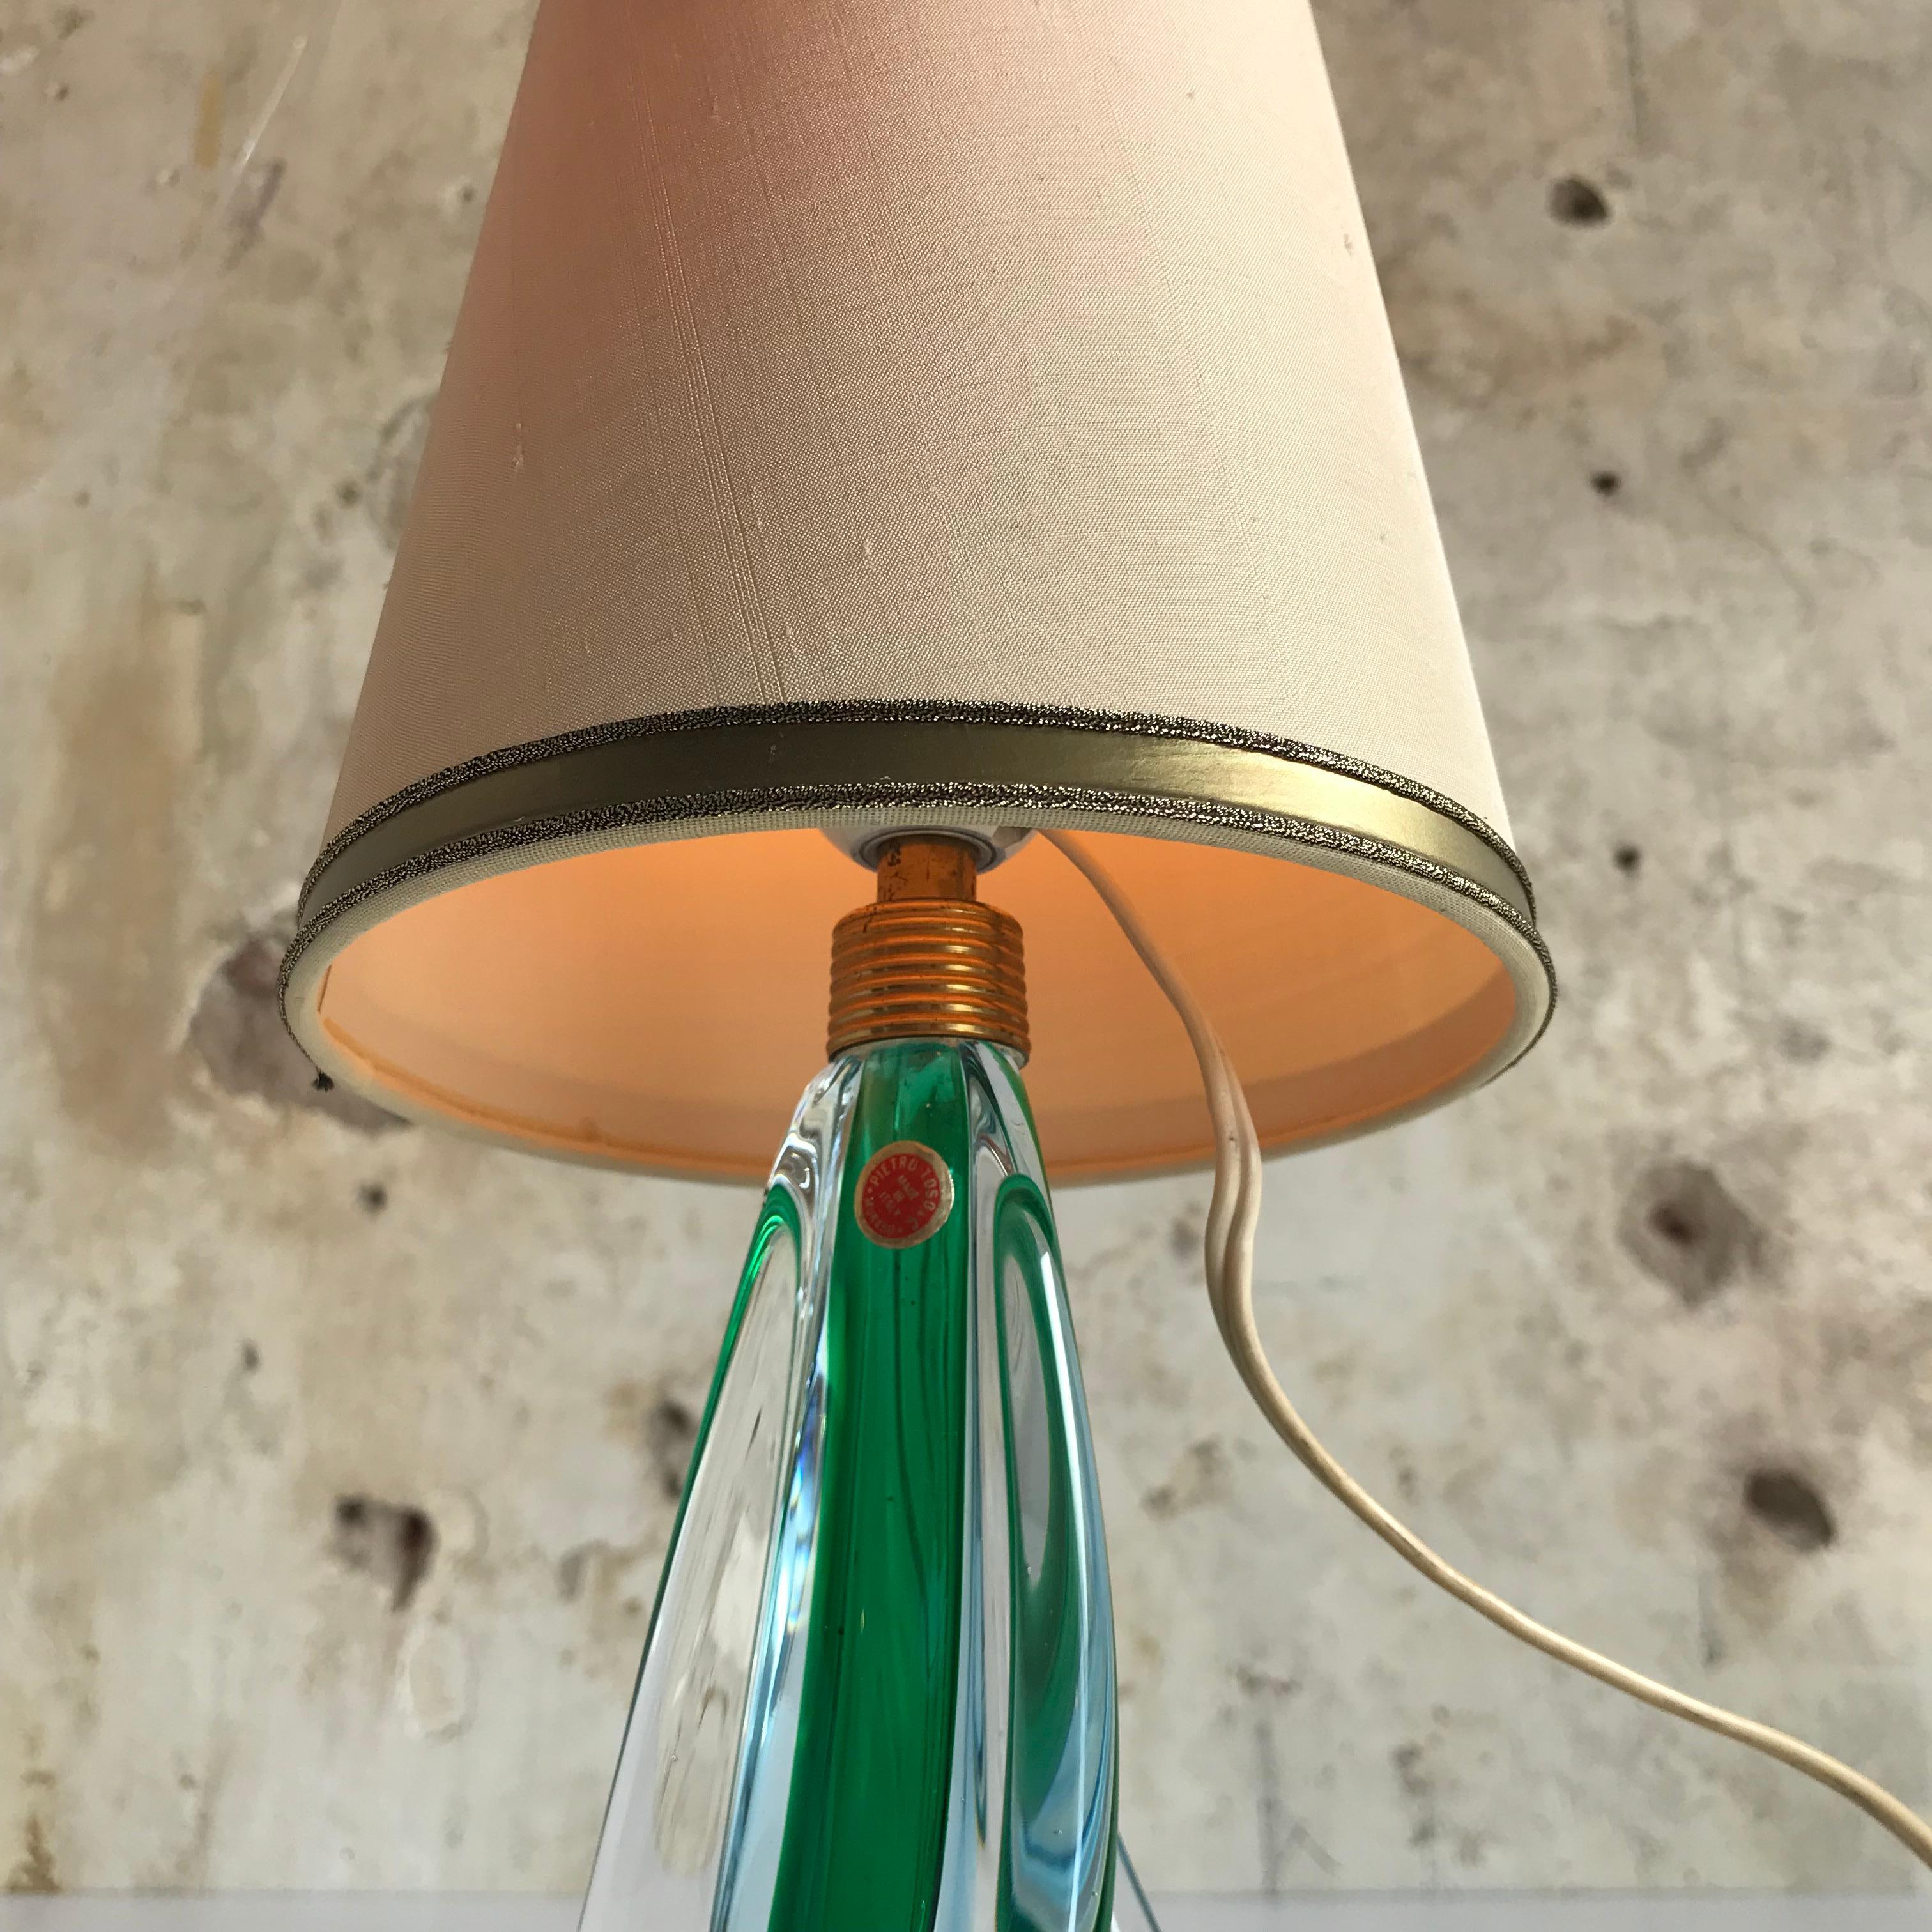 1950s Italian Murano Art Glass Lamp by Pietro Toso, Midcentury, Vintage For Sale 1